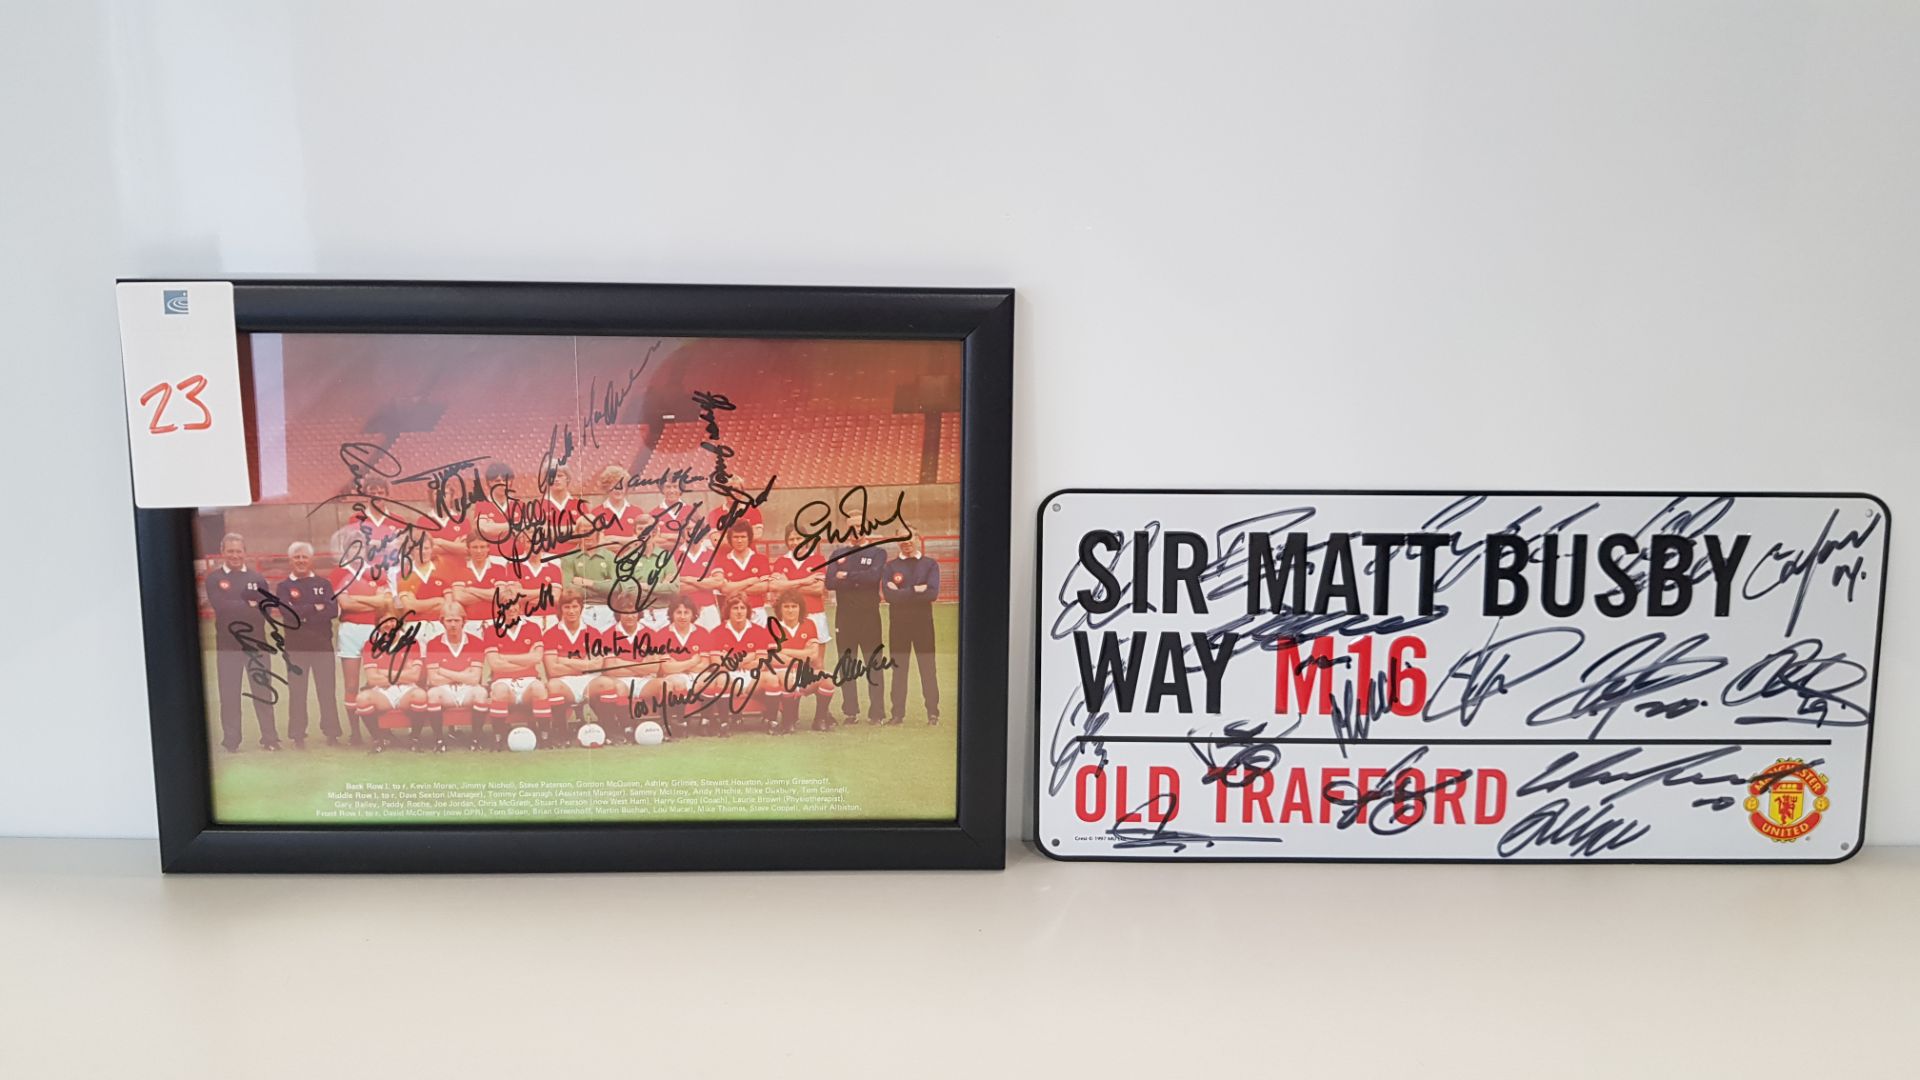 2 X SIGNED ITEMS OF MANCHESTER UNITED MEMORABILIA TO INCLUDE - SIGNED PICTURE OF THE MANCHESTER